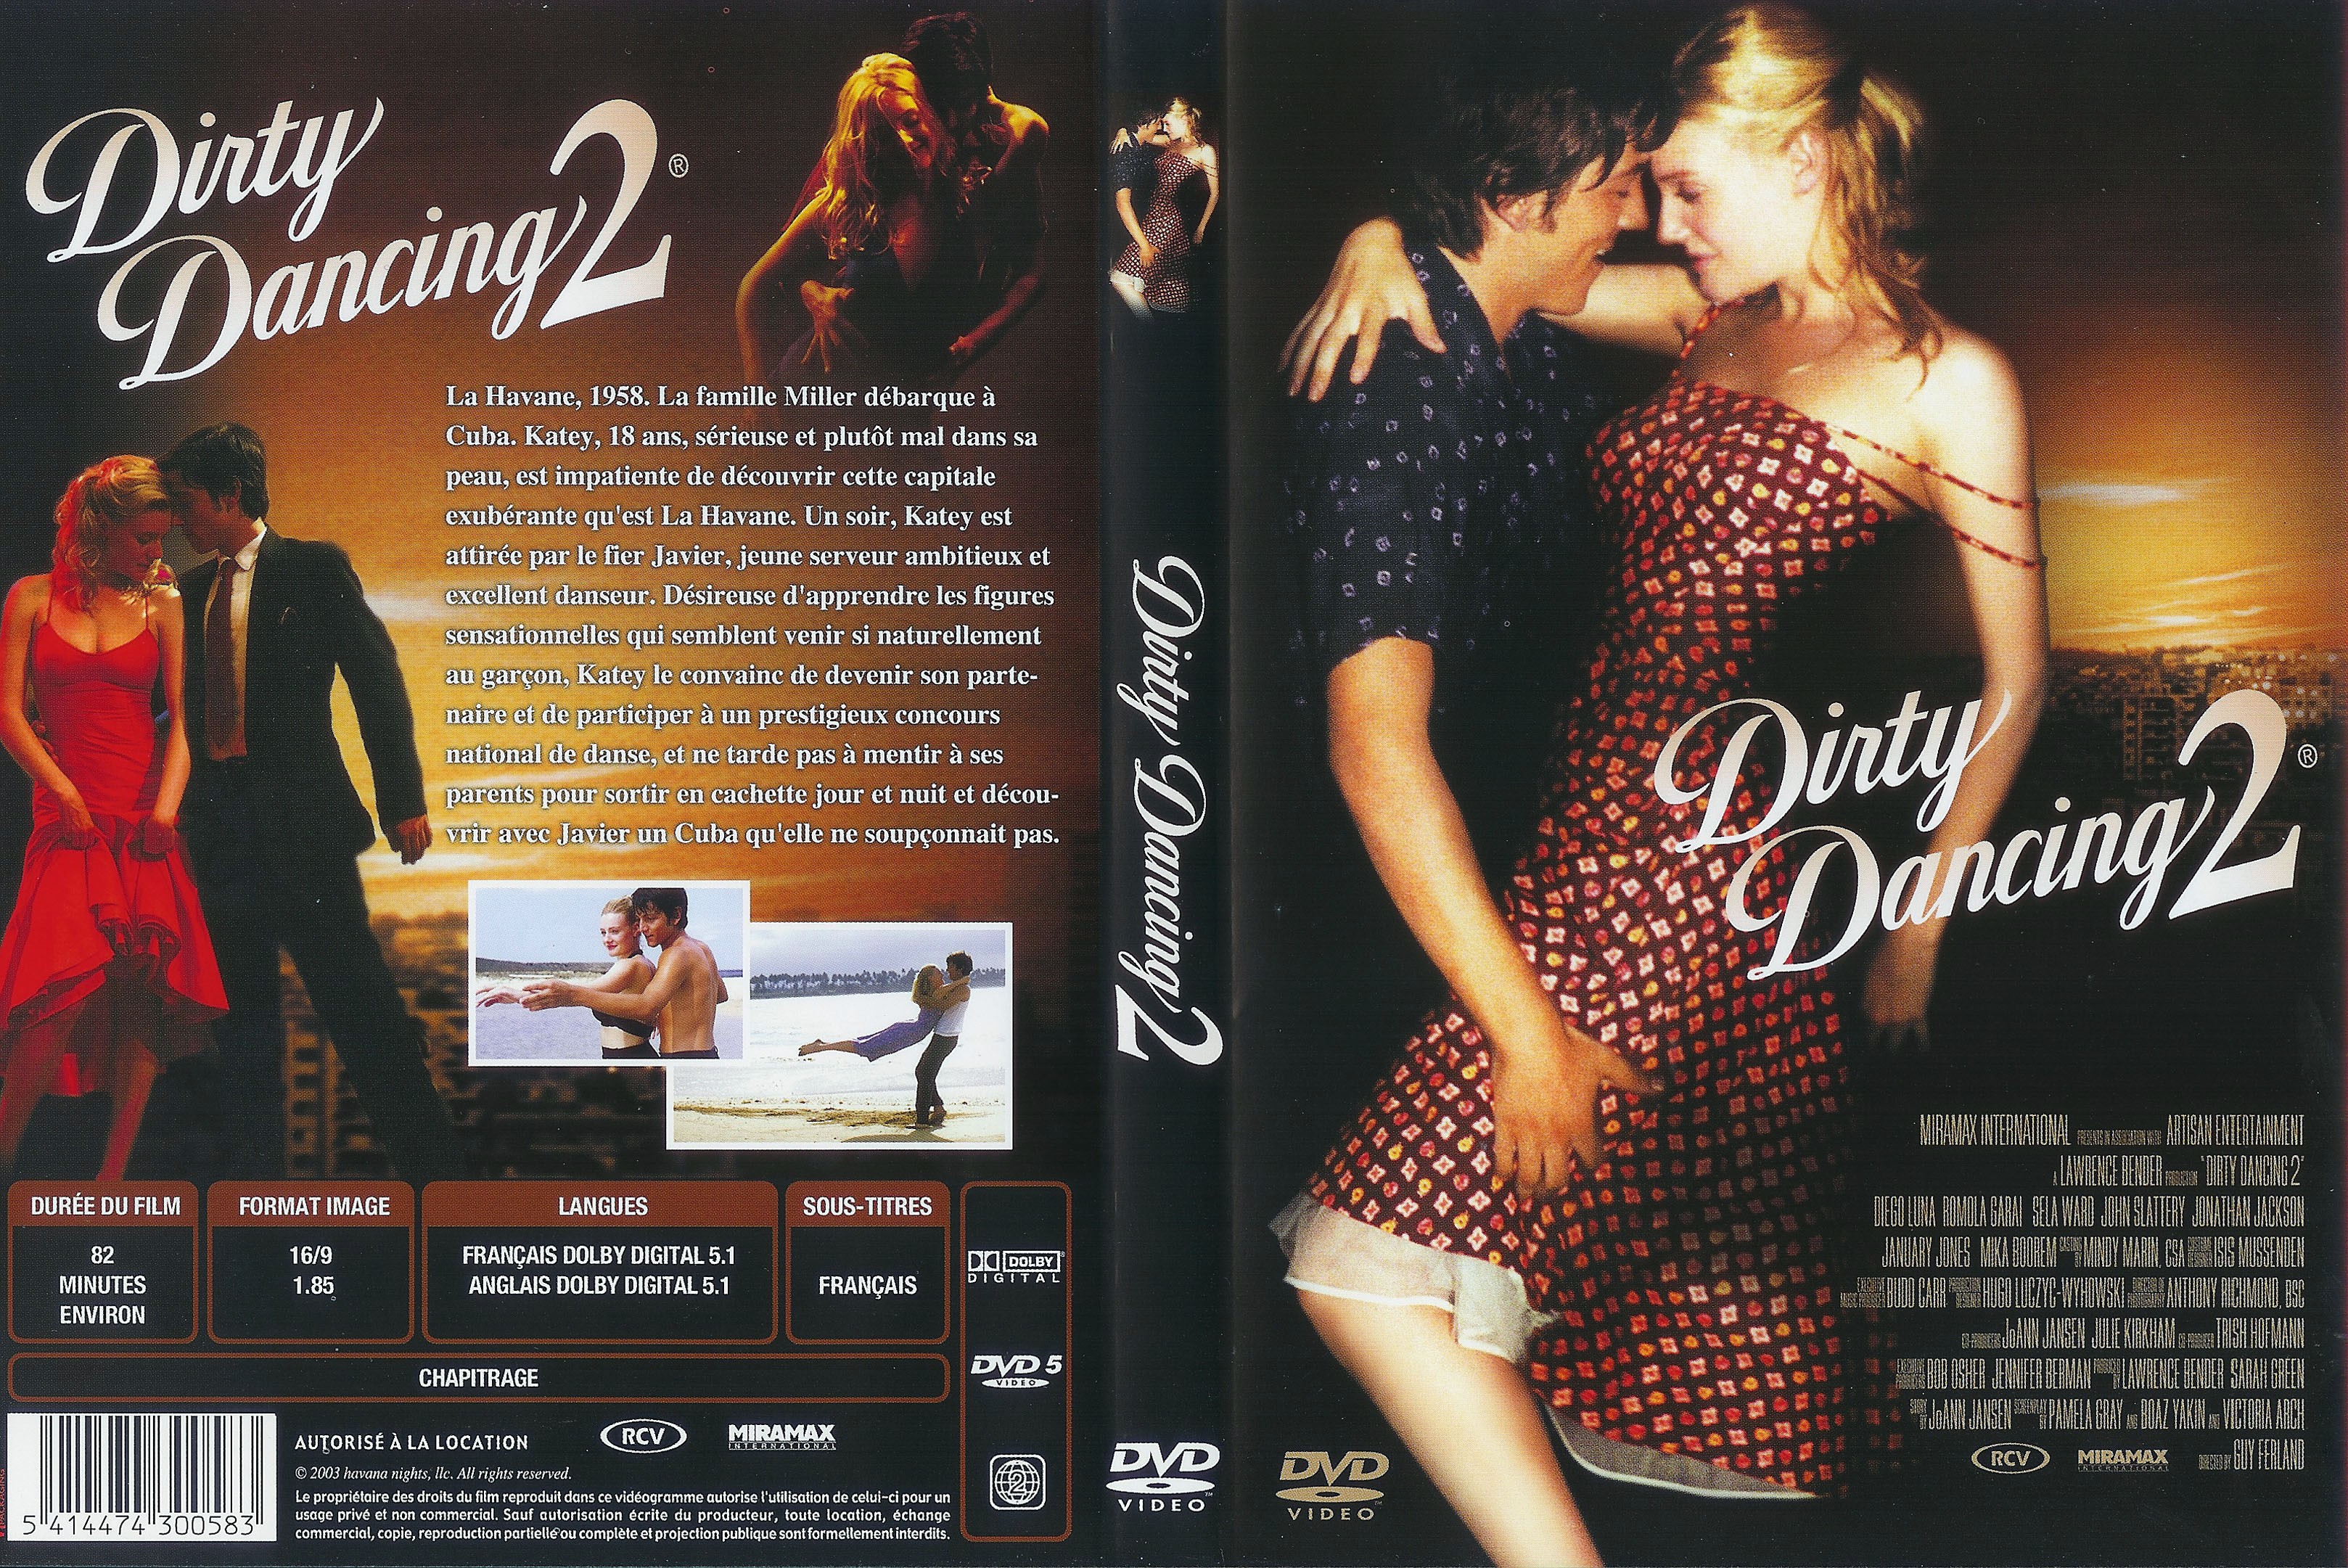 Jaquette DVD Dirty Dancing 2 v2